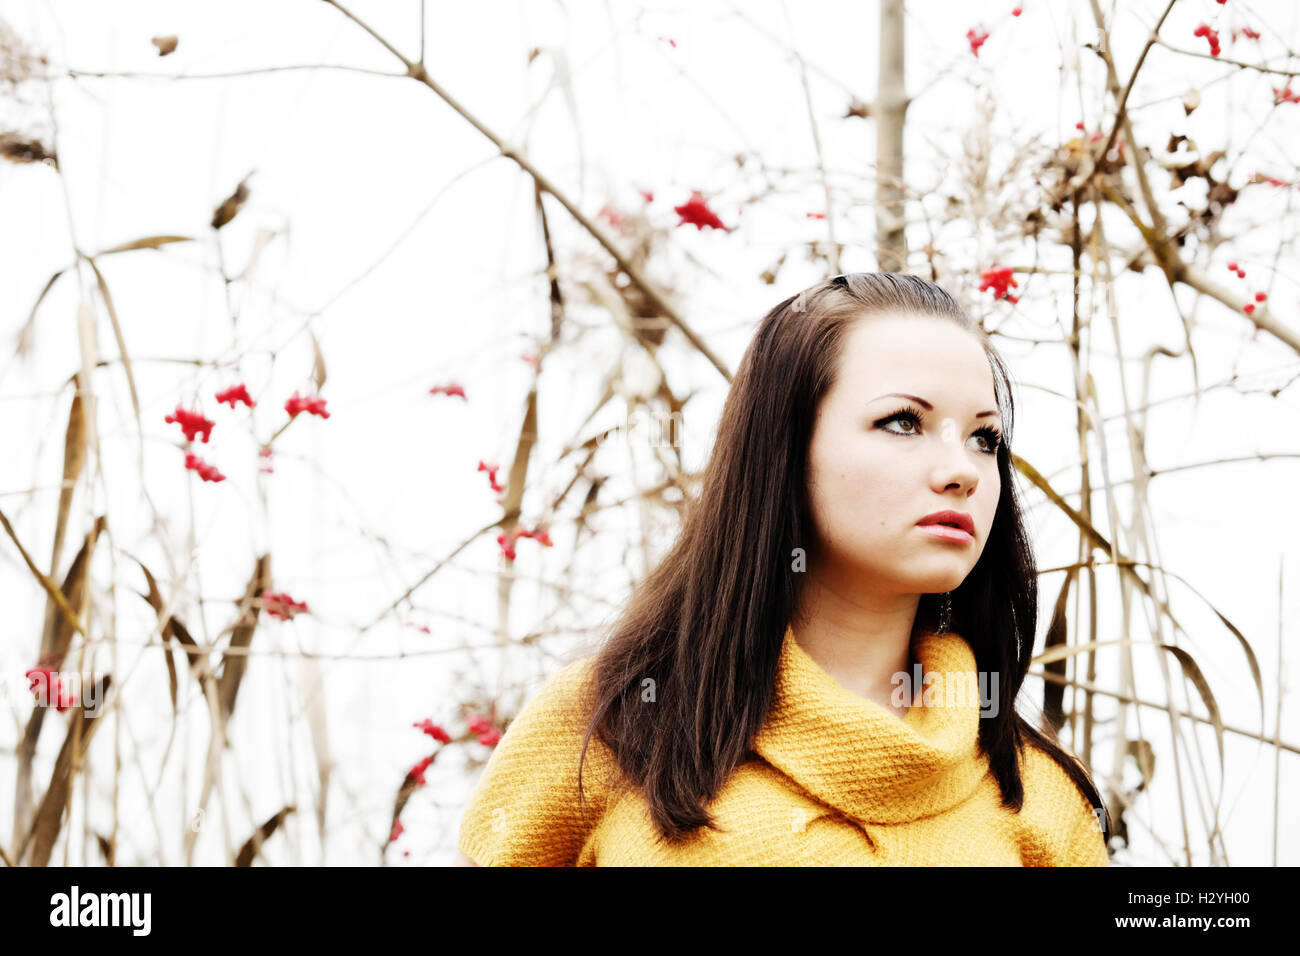 Young woman in an autumnal setting, fashion shoot Stock Photo